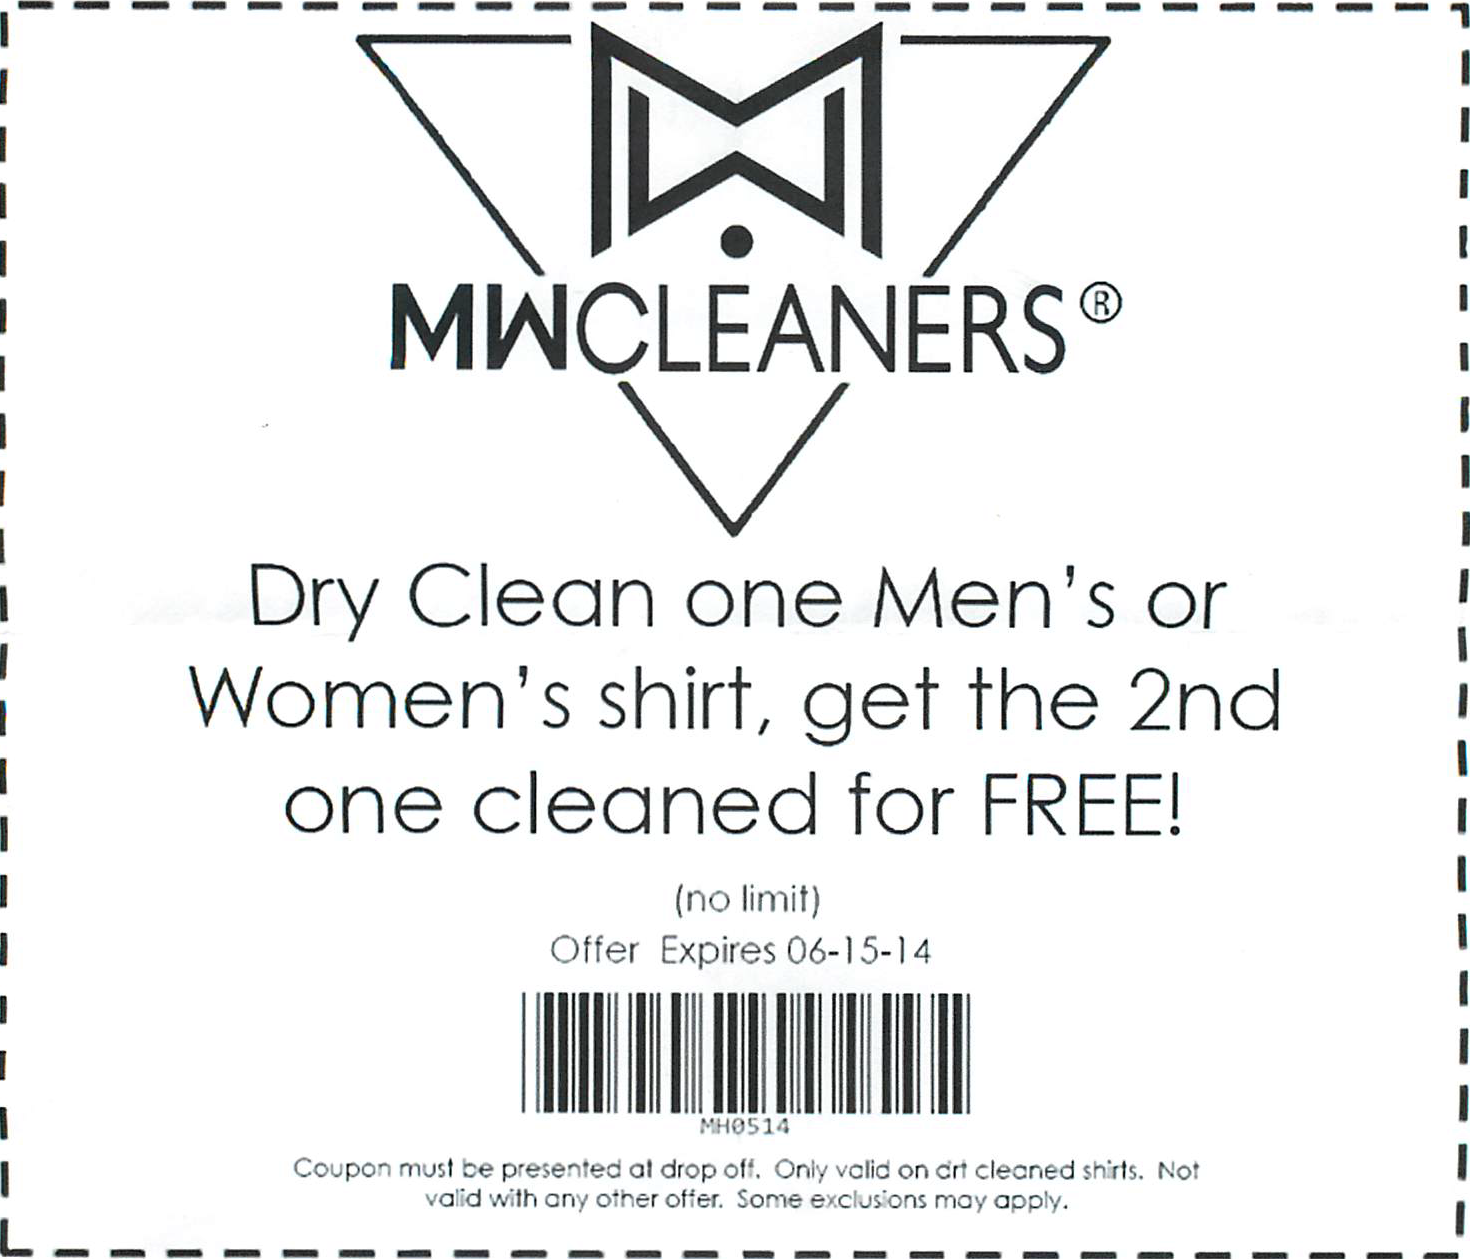 MW Cleaners Coupon – Clean One Shirt, Get One Cleaned FREE!